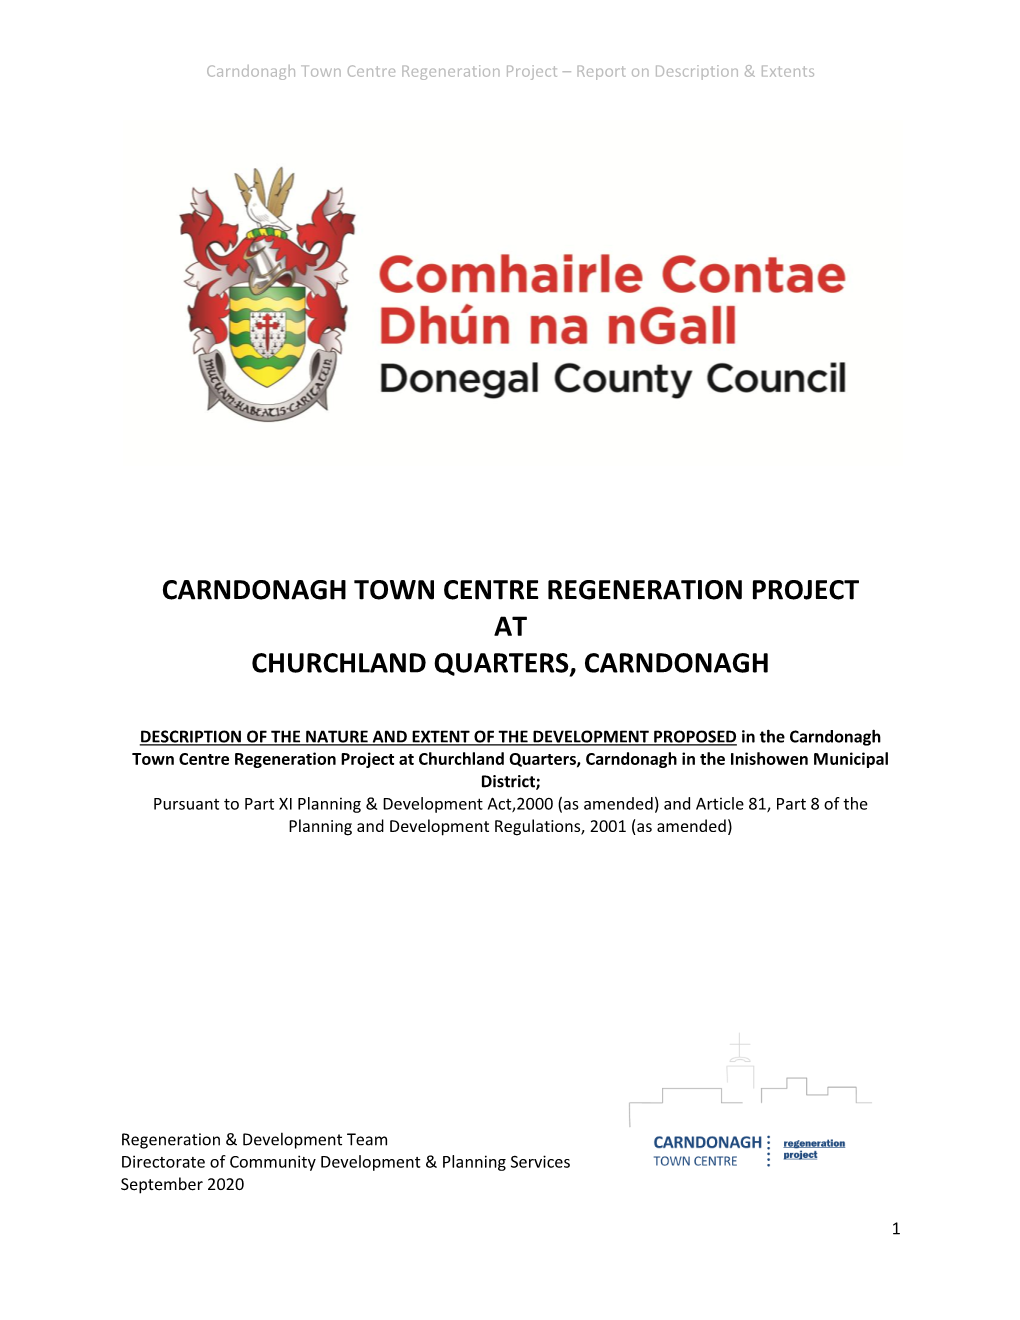 Nature and Extents of the Carndonagh Town Centre Regeneration Project